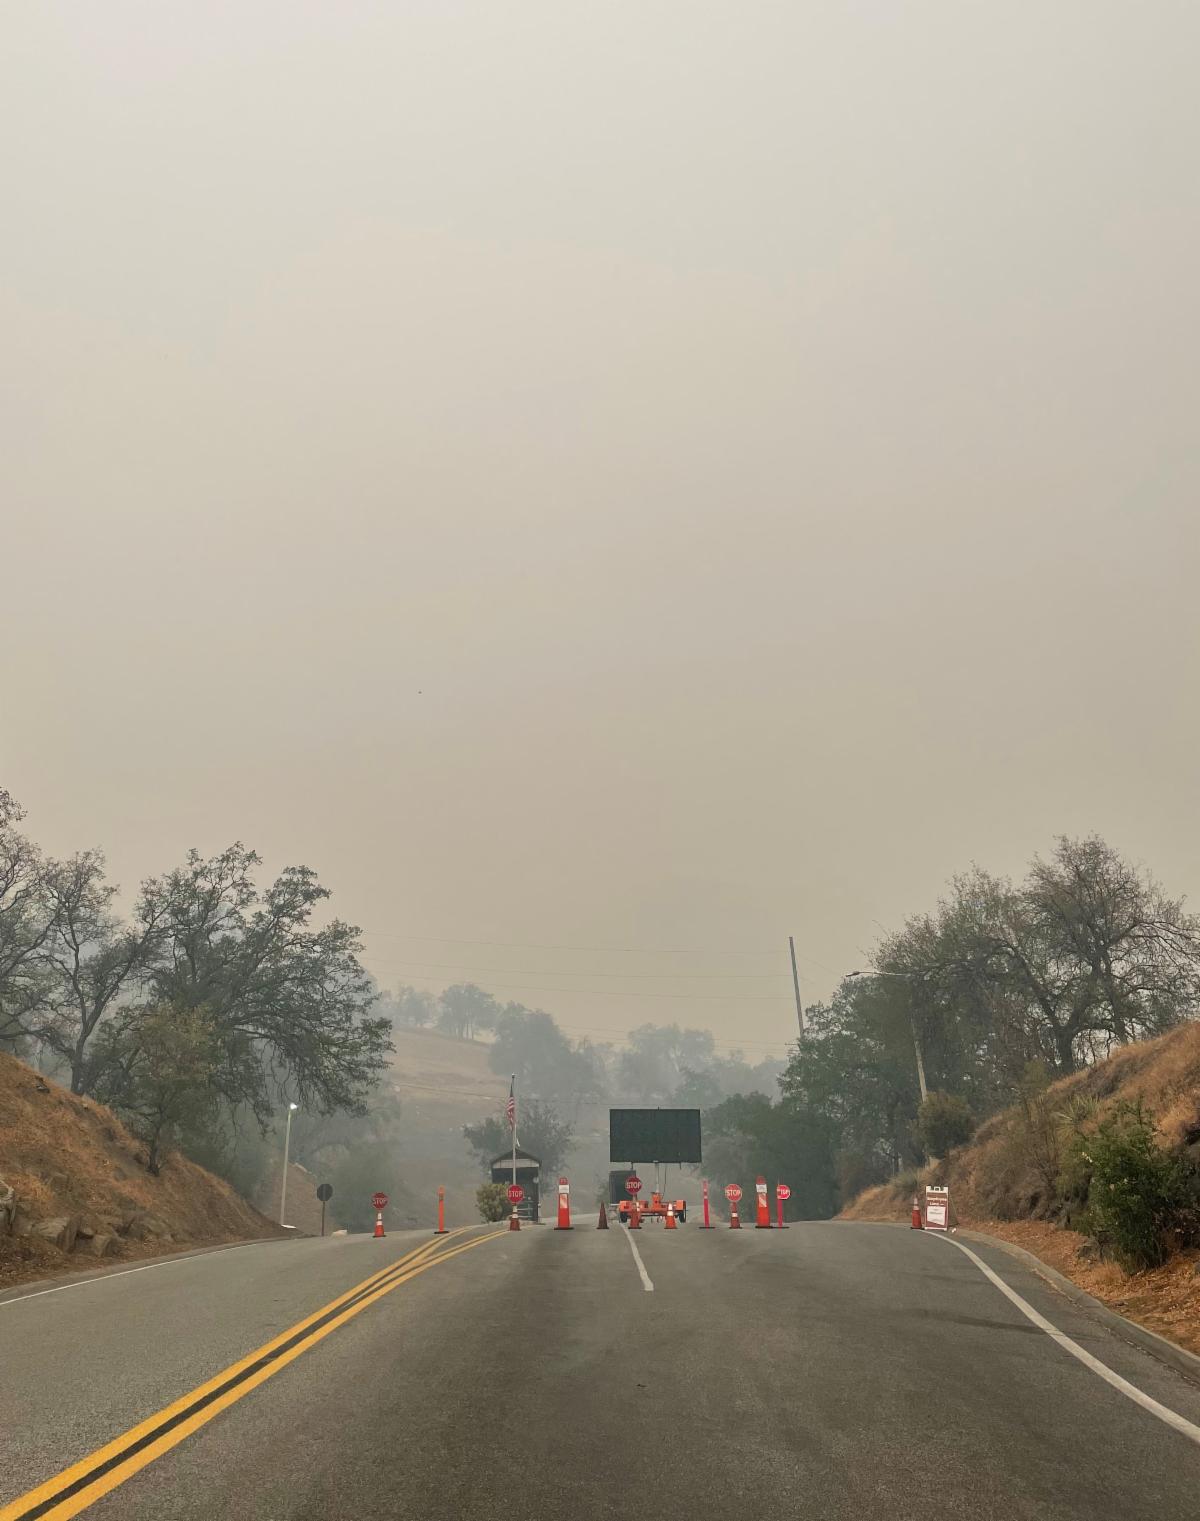 Sequoia National Park park entrance engulfed in greyish smoke from wildfire on 9/12/21